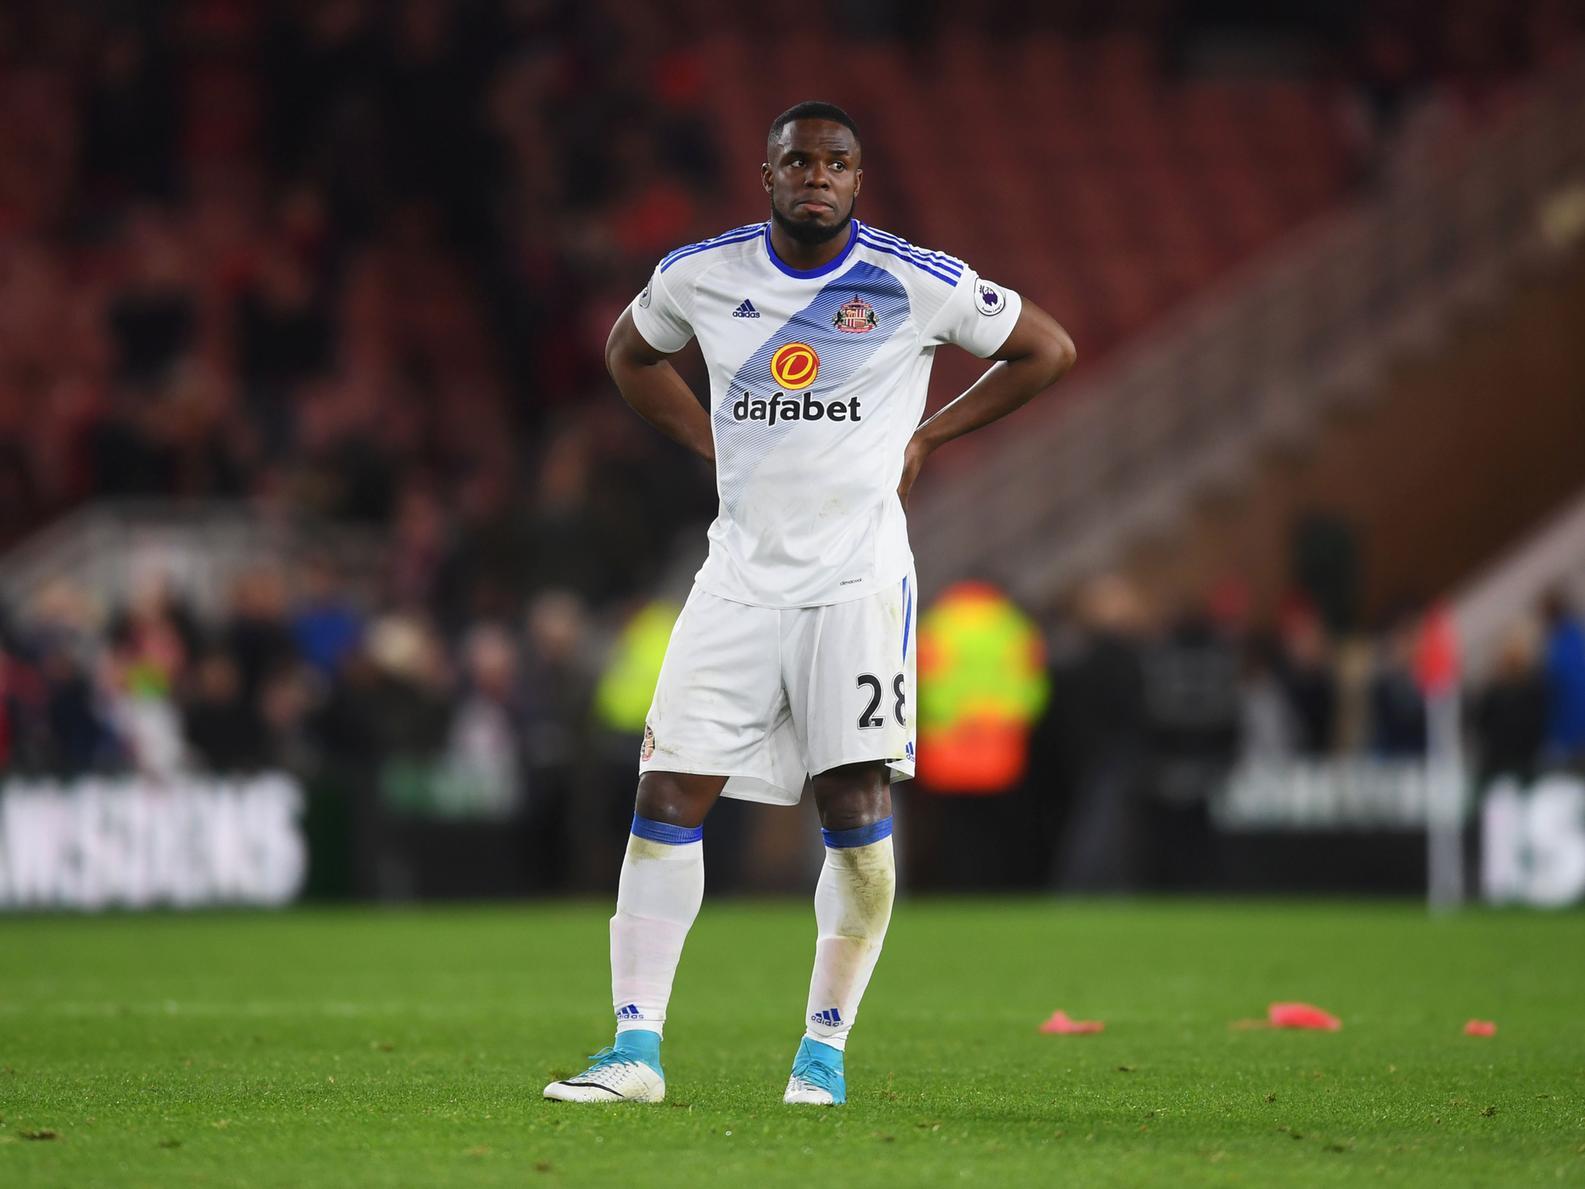 Free agent Victor Anichebe has claimed he rejected various contract offers from Doncaster Rovers during his time training with the club. (Doncaster Free Press)